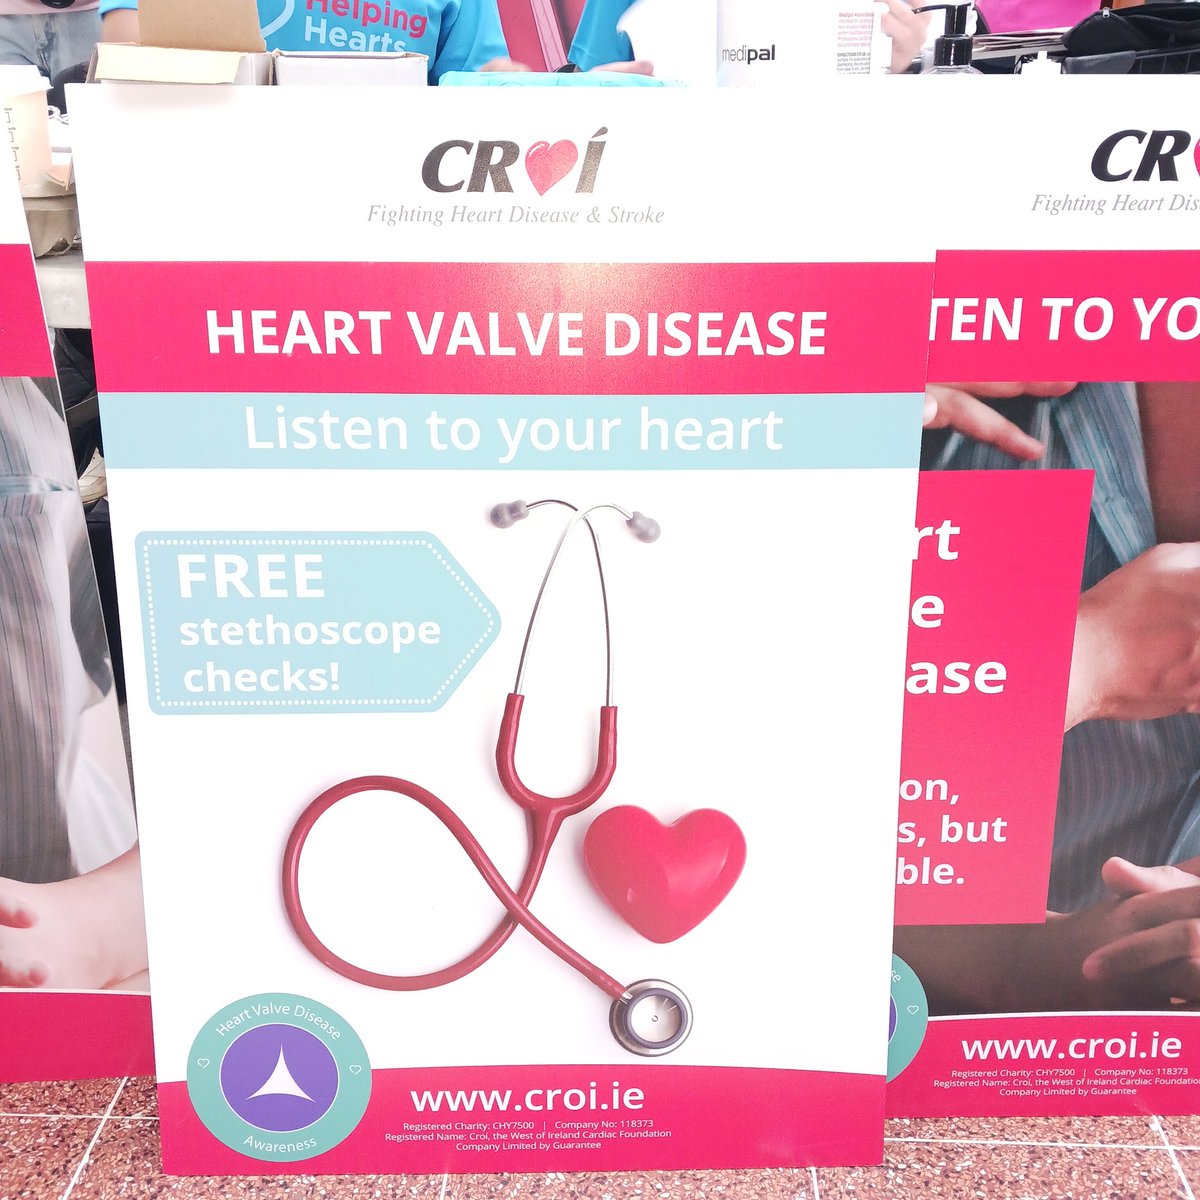 Very busy morning at @CastletroyTown where staff from @CroiHeartStroke & Cardiology Dept @ULHospitals are providing heart checks for Heart Month from 10-2pm today. #heartmonth #heartvalve @samersully @breda_dermott @CatrionaAhern @MaryCorry3 @patriciaApower